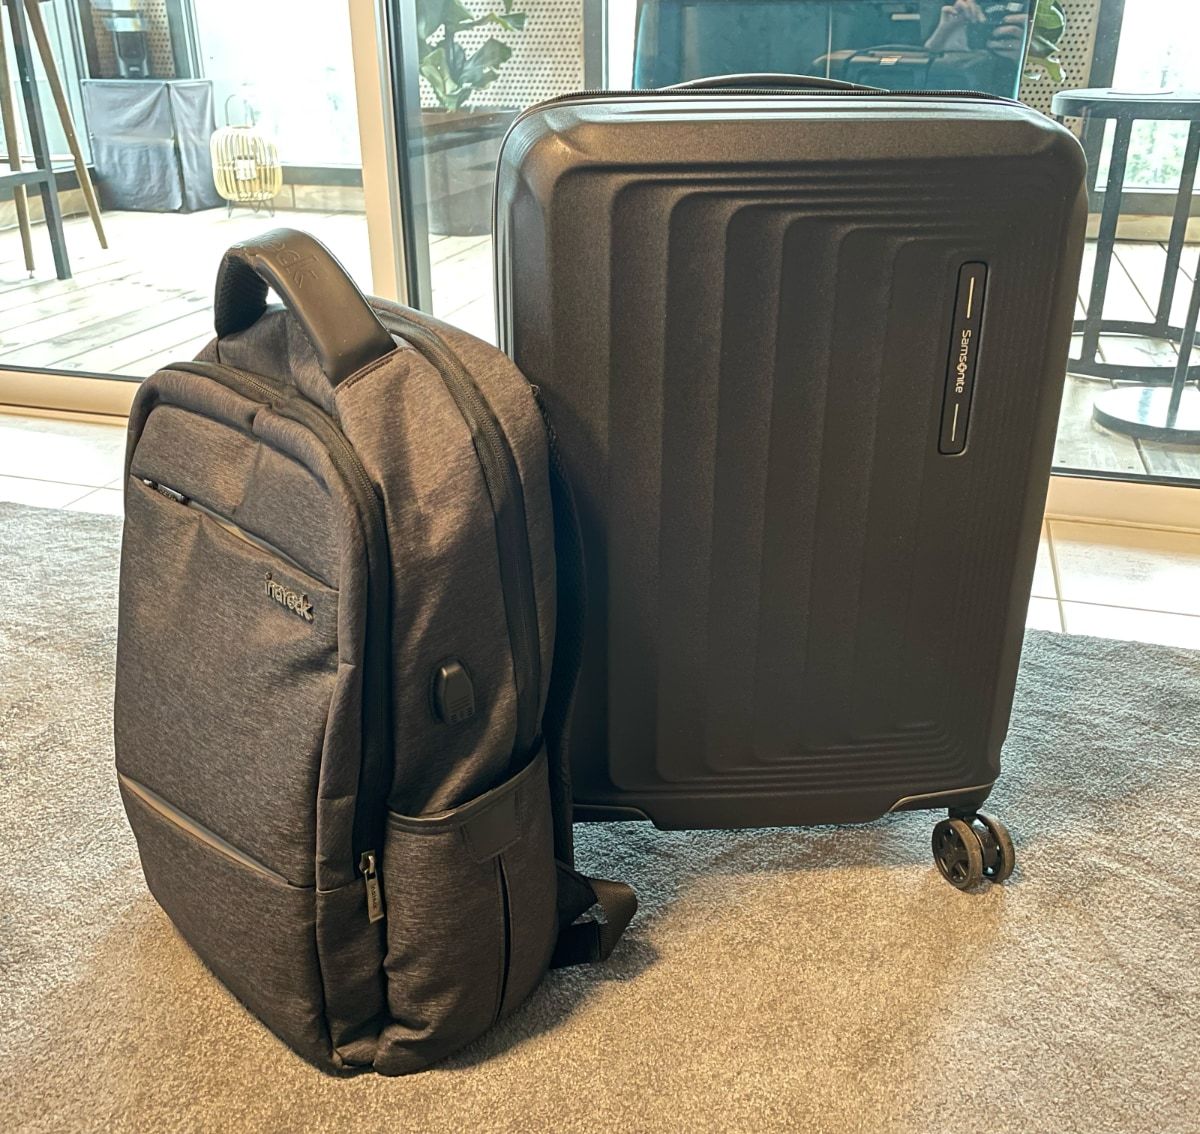 My Minimal and Efficient Digital Nomad Packing Process